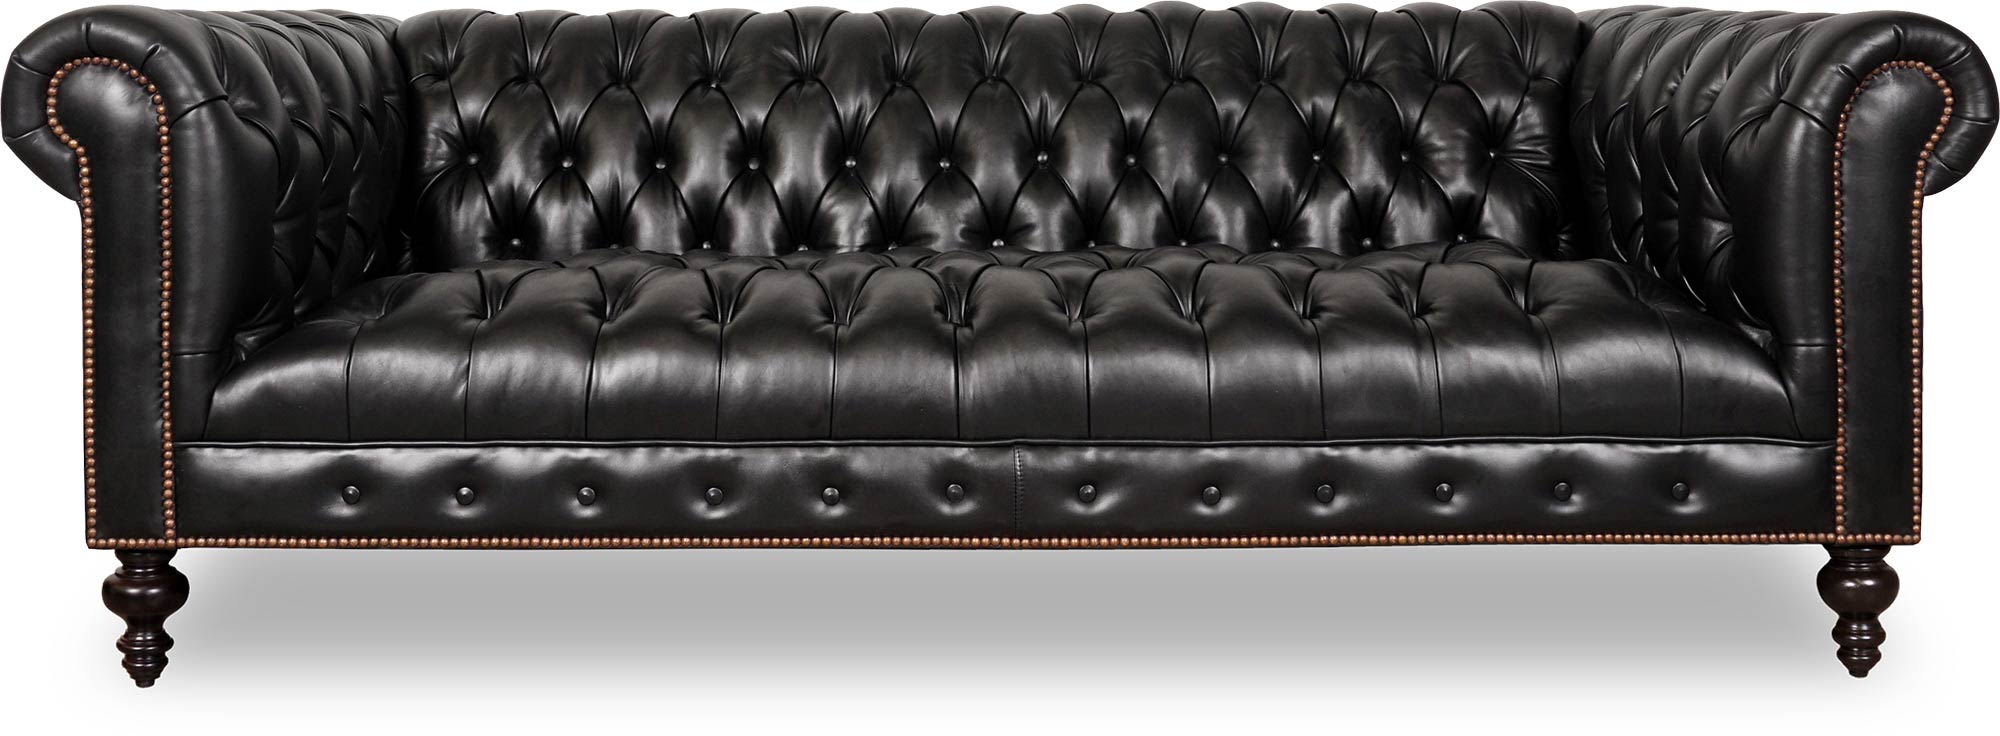 Chesterfield Sofas Armchairs, Who Makes Chesterfield Sofas